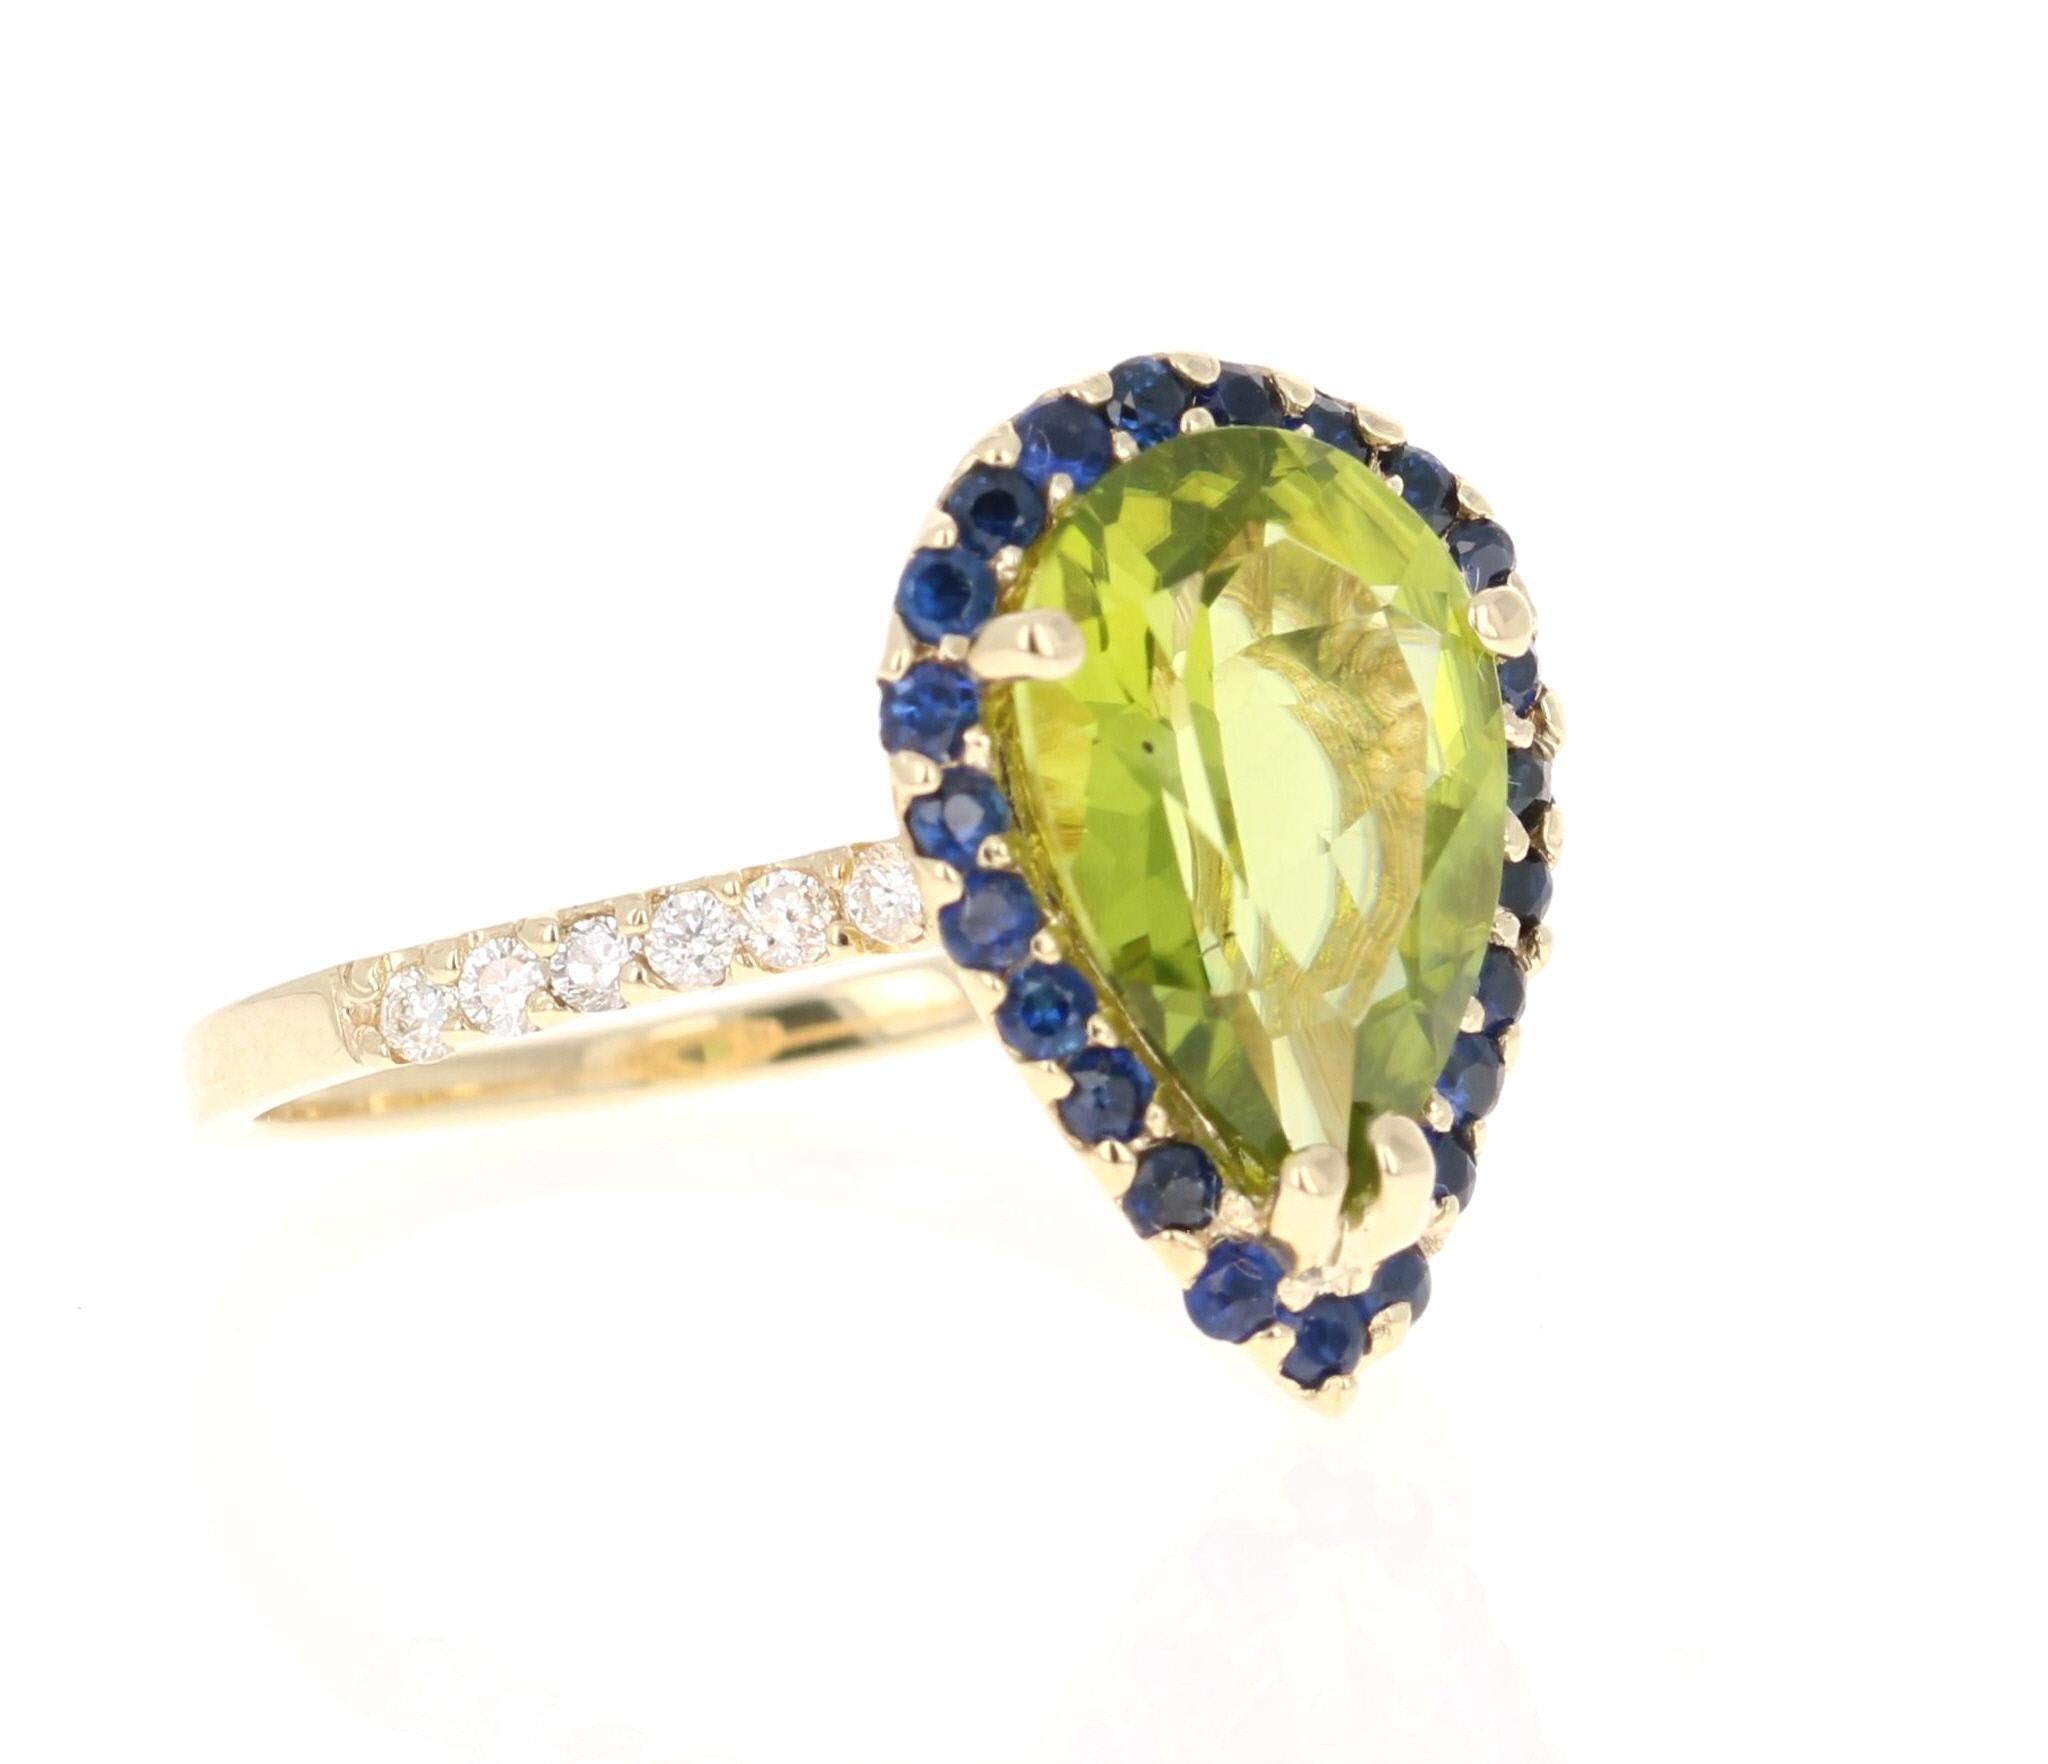 This beautiful ring has a Pear Cut Peridot in the center that weighs 2.80 carats. The ring is surrounded by a cute halo of blue sapphires. There are 23 Blue Sapphires that weigh 0.45 carats and there are 12 Round Cut Diamonds that weigh 0.17 carats